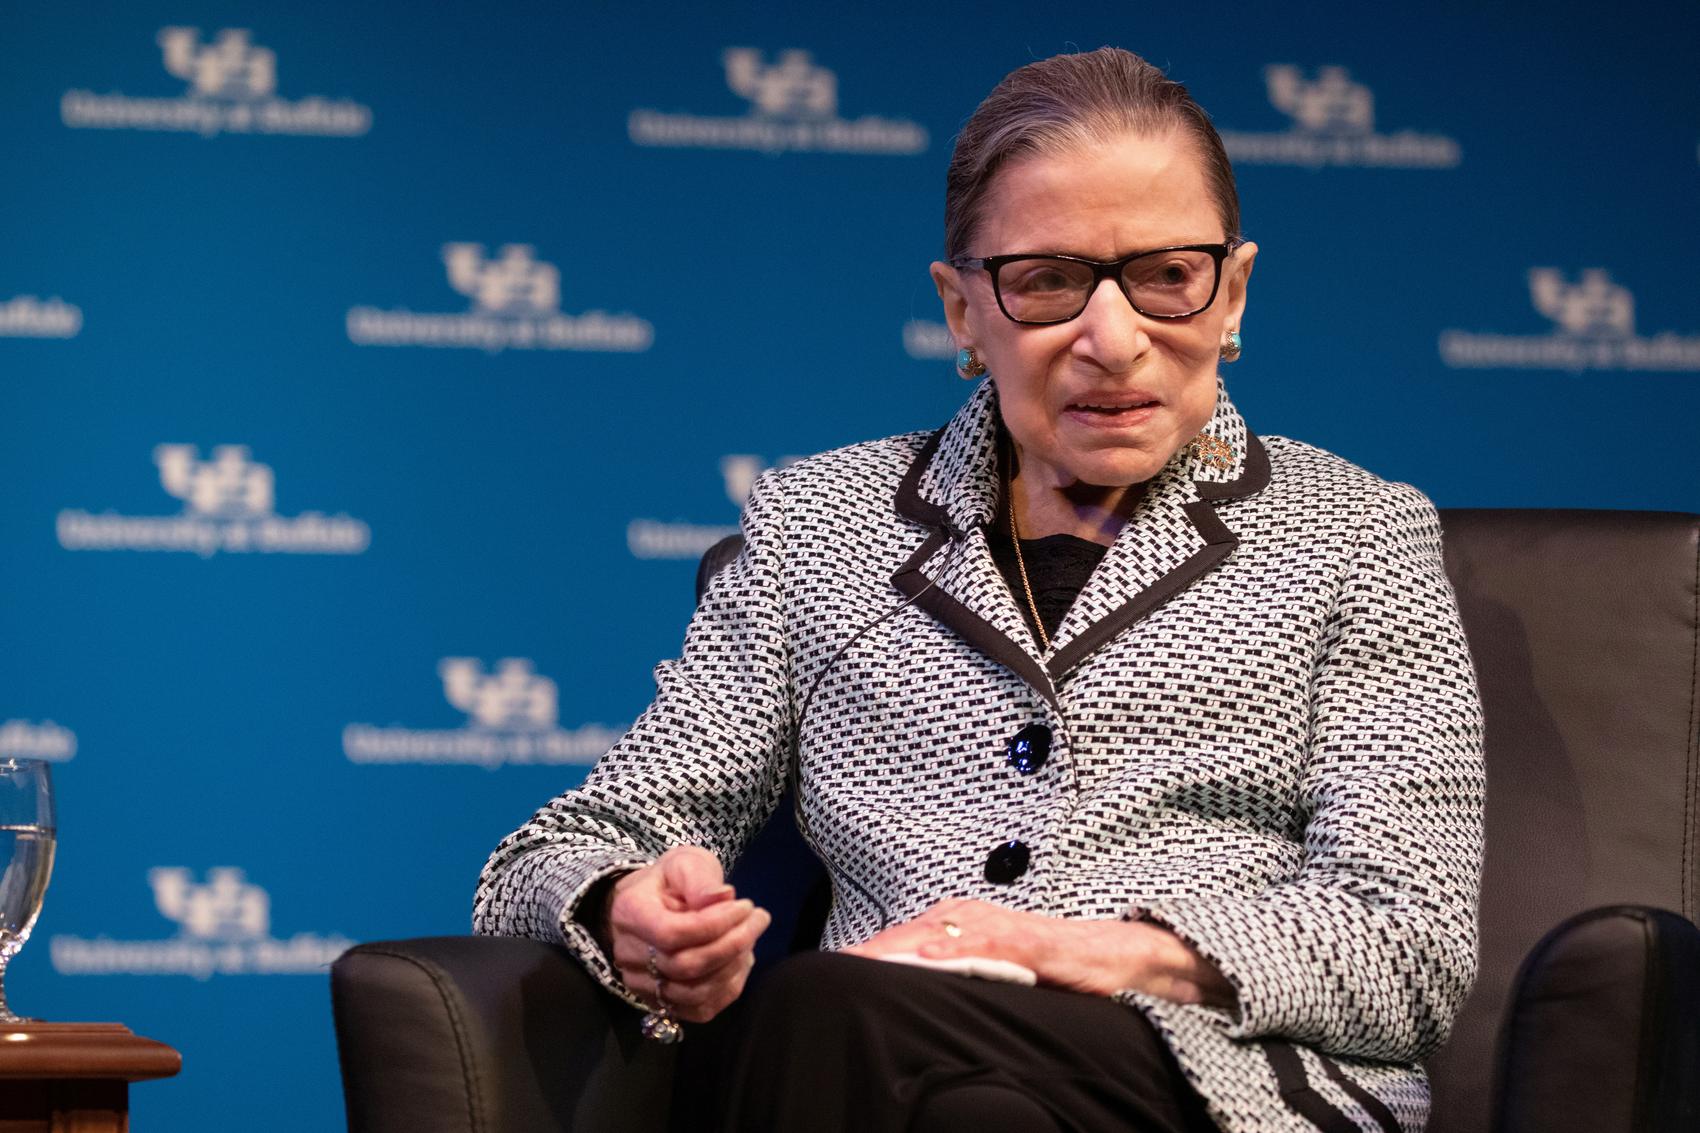 U.S. Supreme Court Justice Ginsburg dies at age 87 from pancreatic cancer